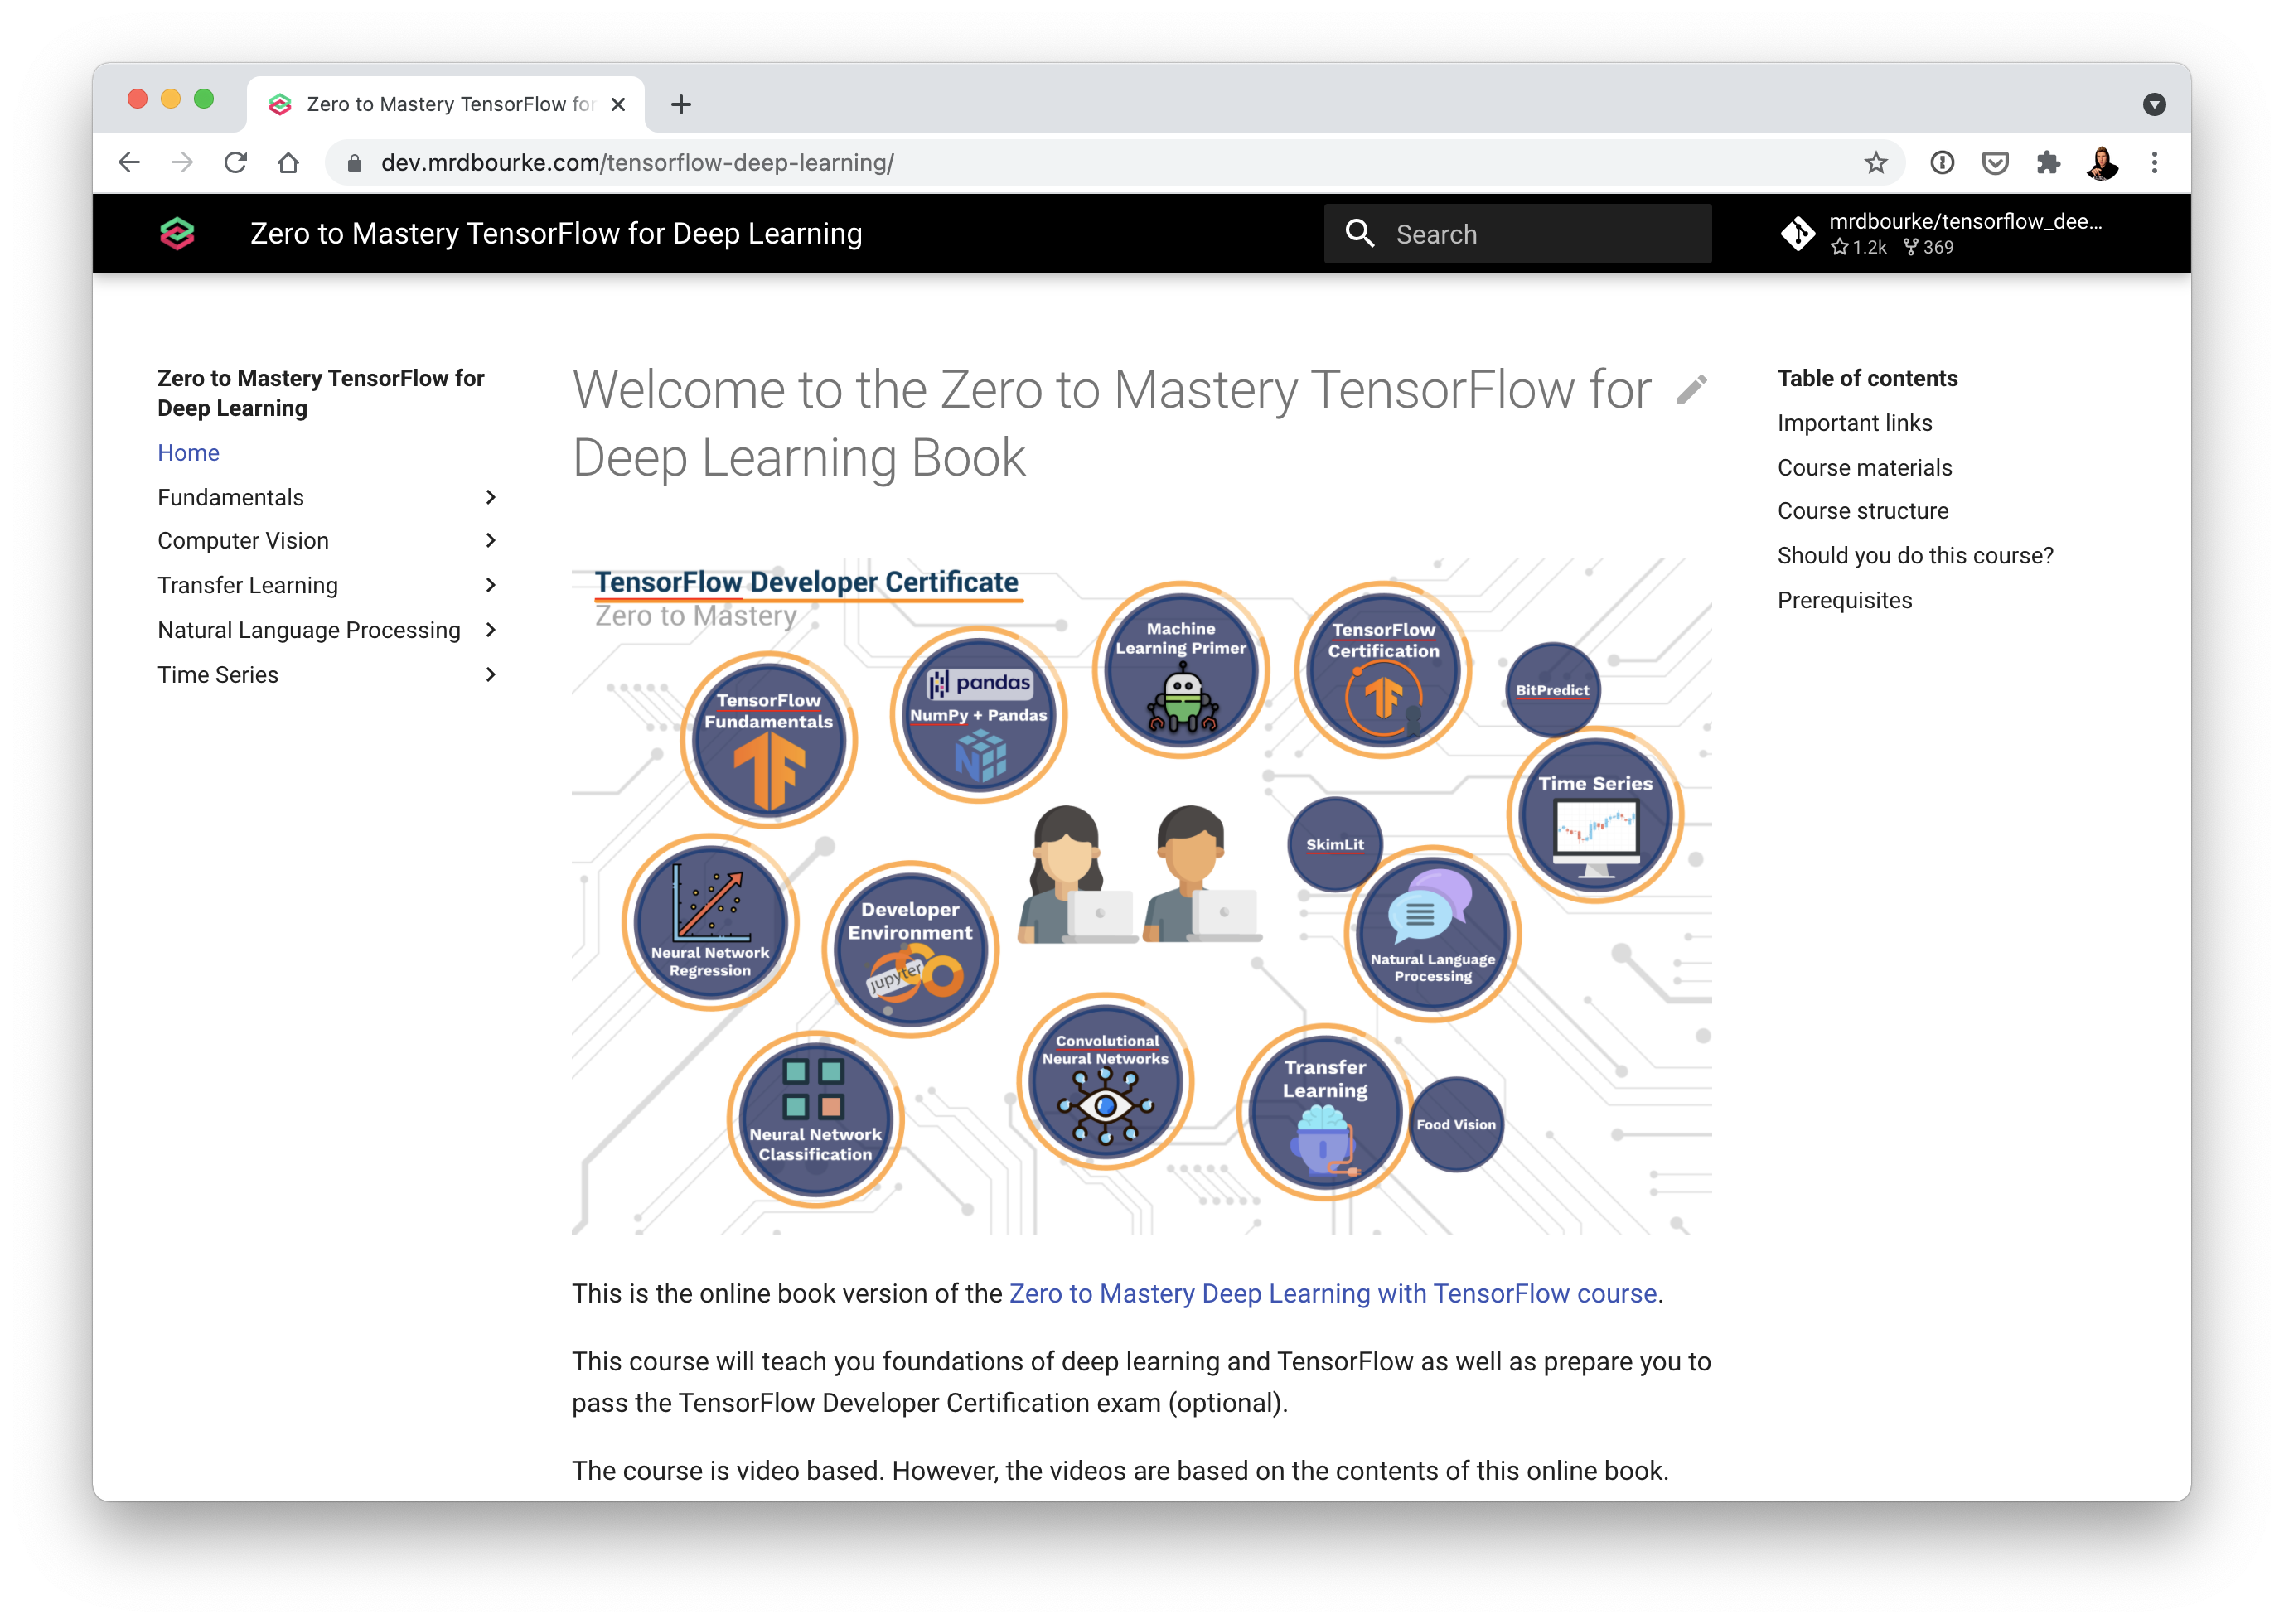 learn-tensorflow-book-homepage Screen Shot 2021-07-01 at 4.49.10 pm